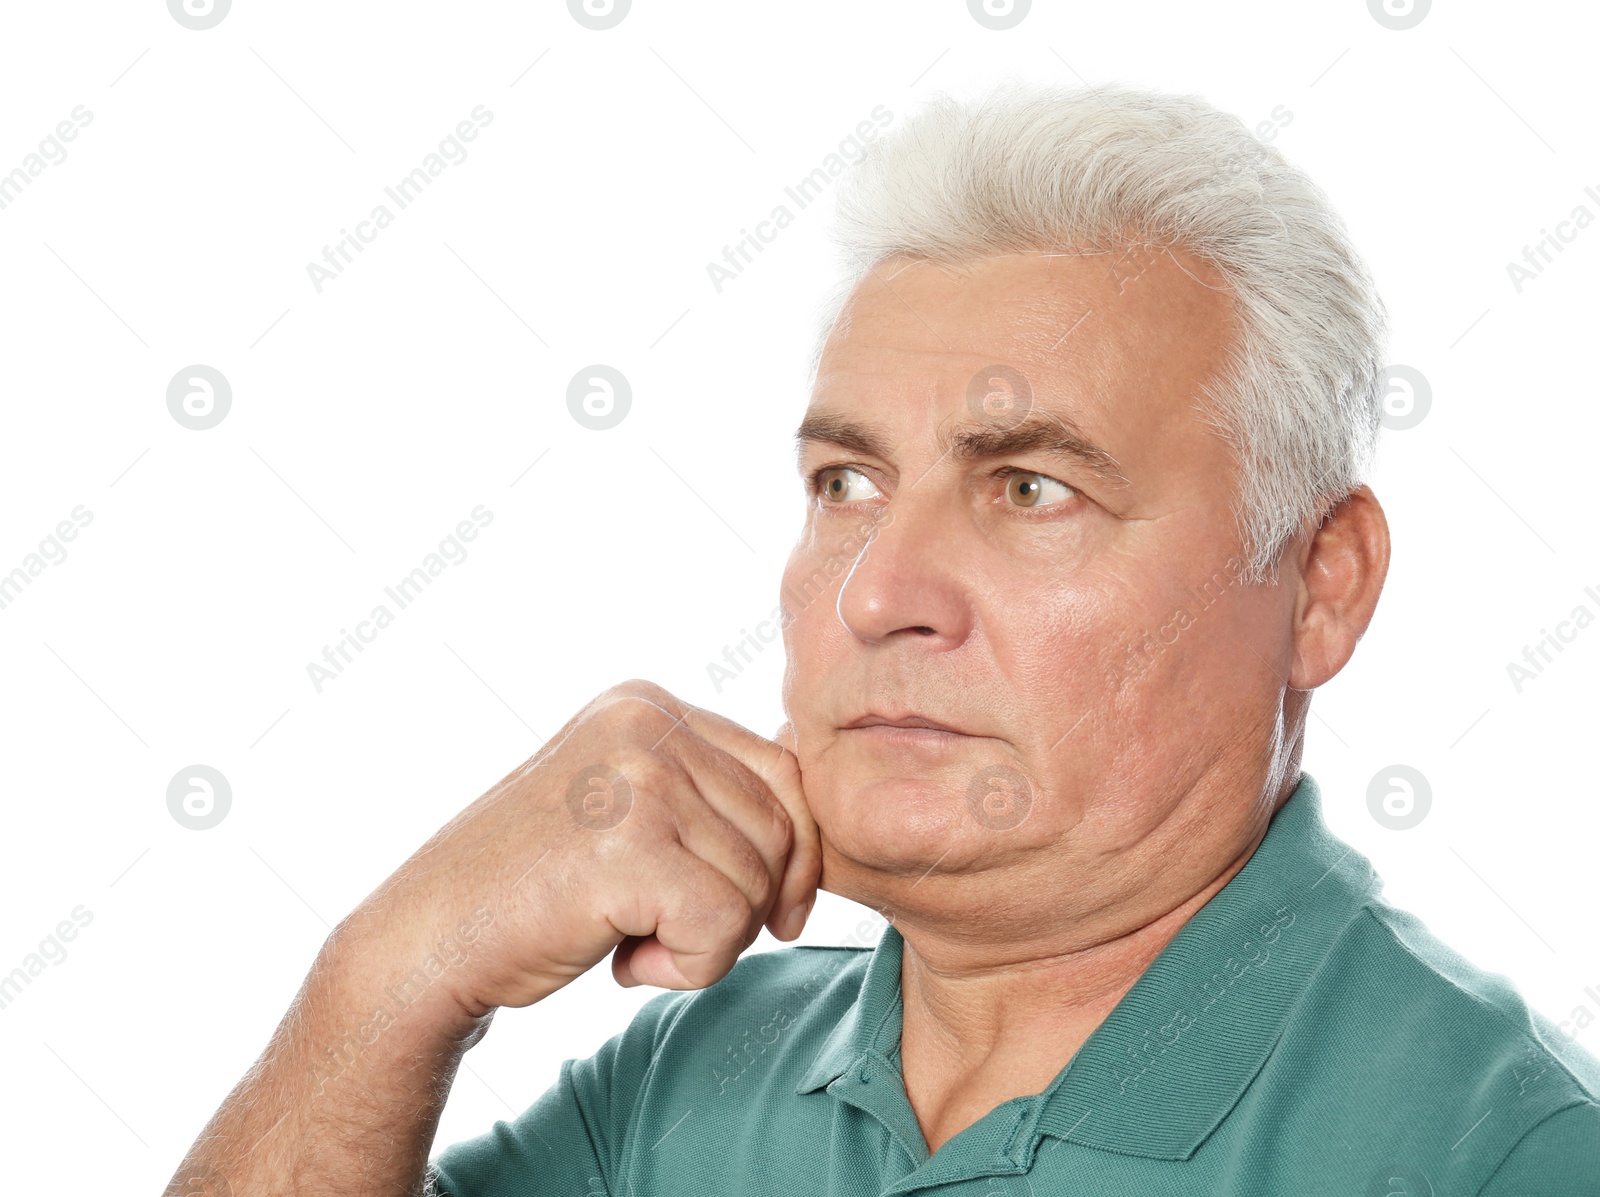 Photo of Mature man with double chin on white background